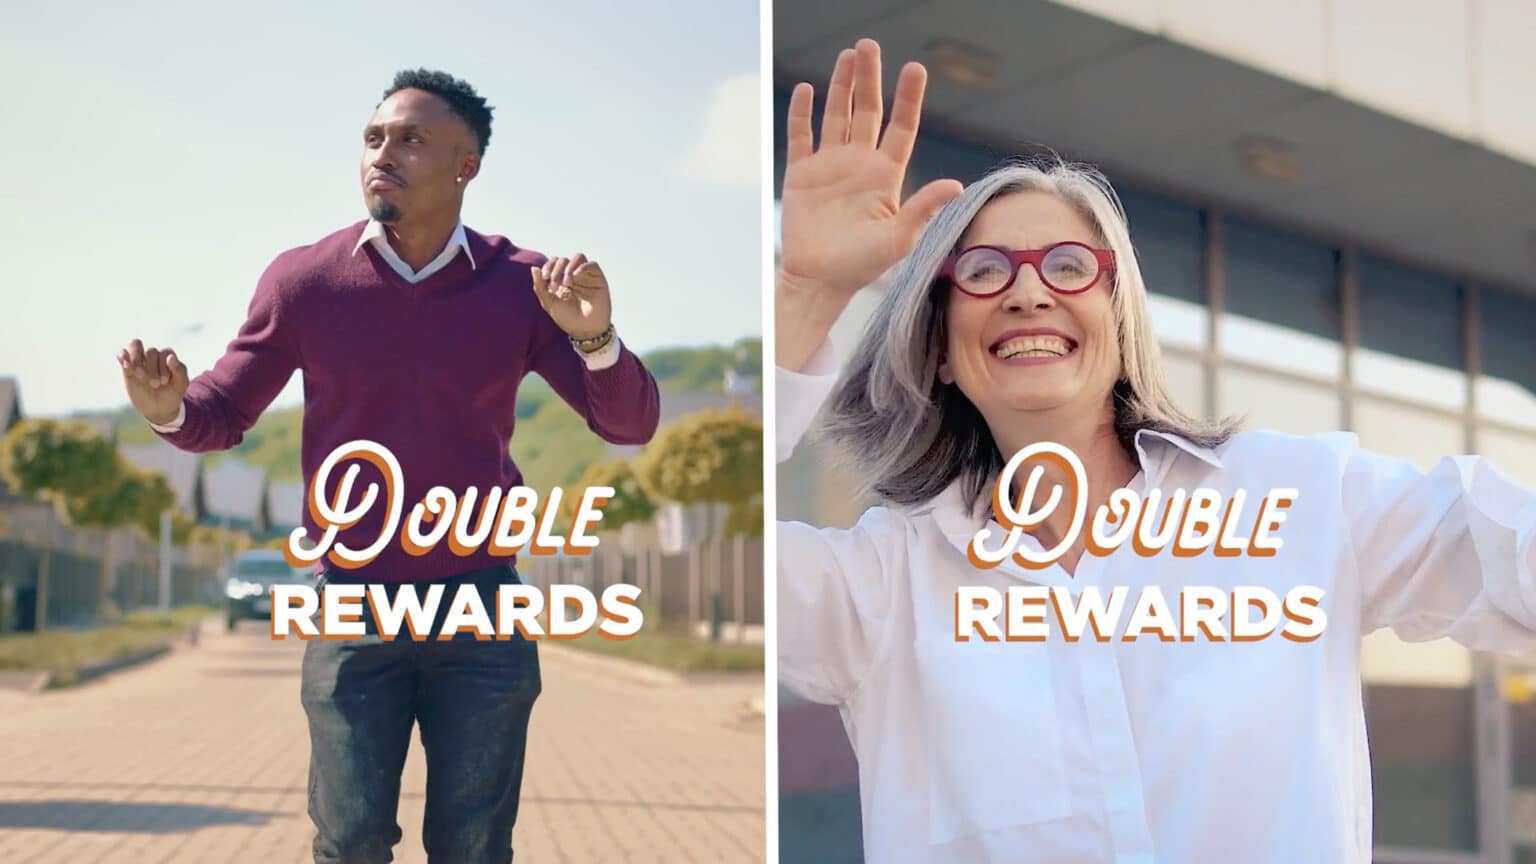 Double Rewards - Split image with man and woman dancing